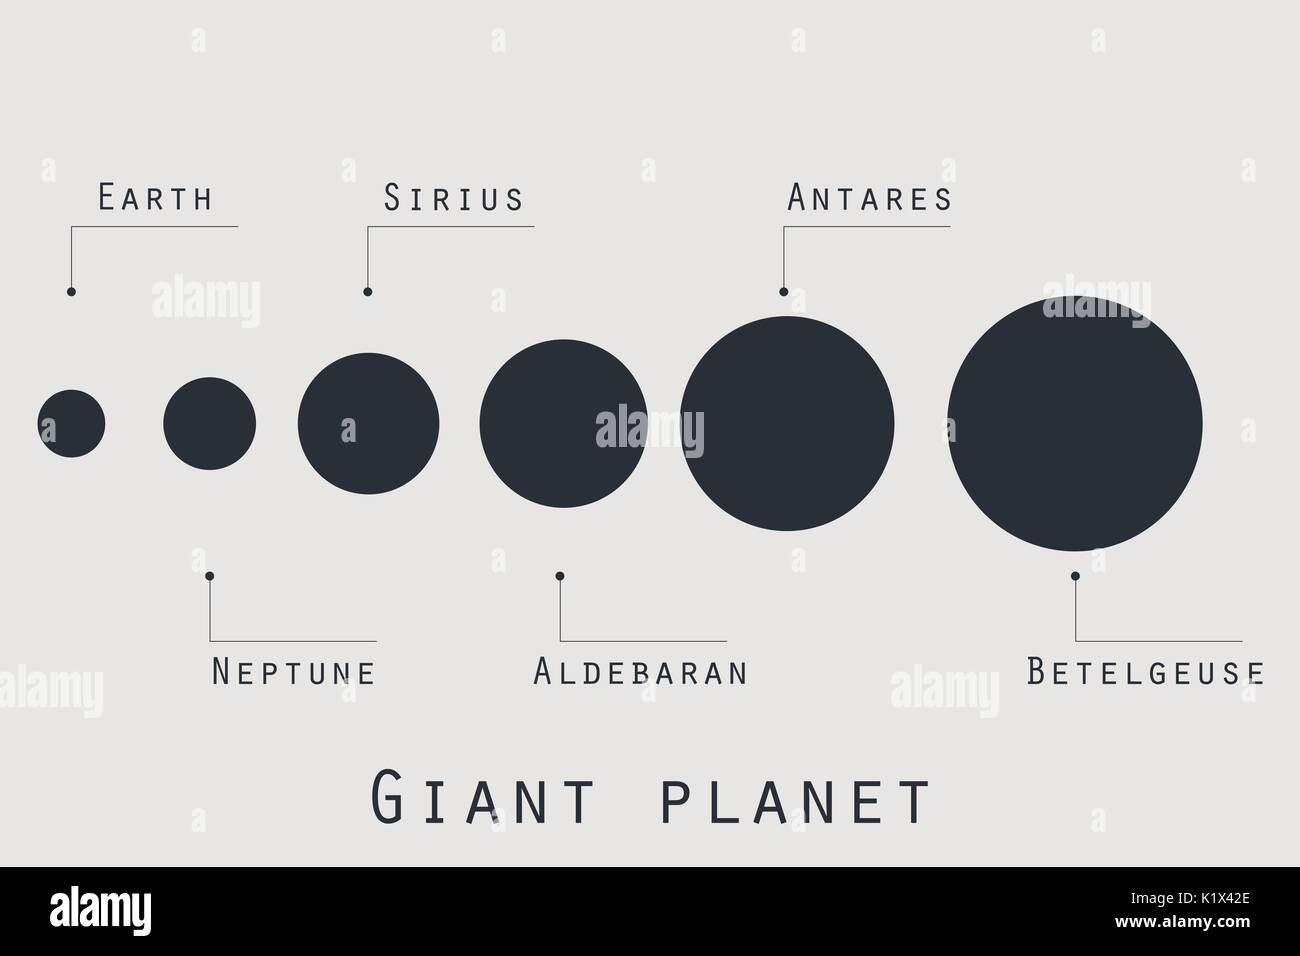 Giant planet  in original style. Planets and stars of the universe. Major planets. Stock Vector